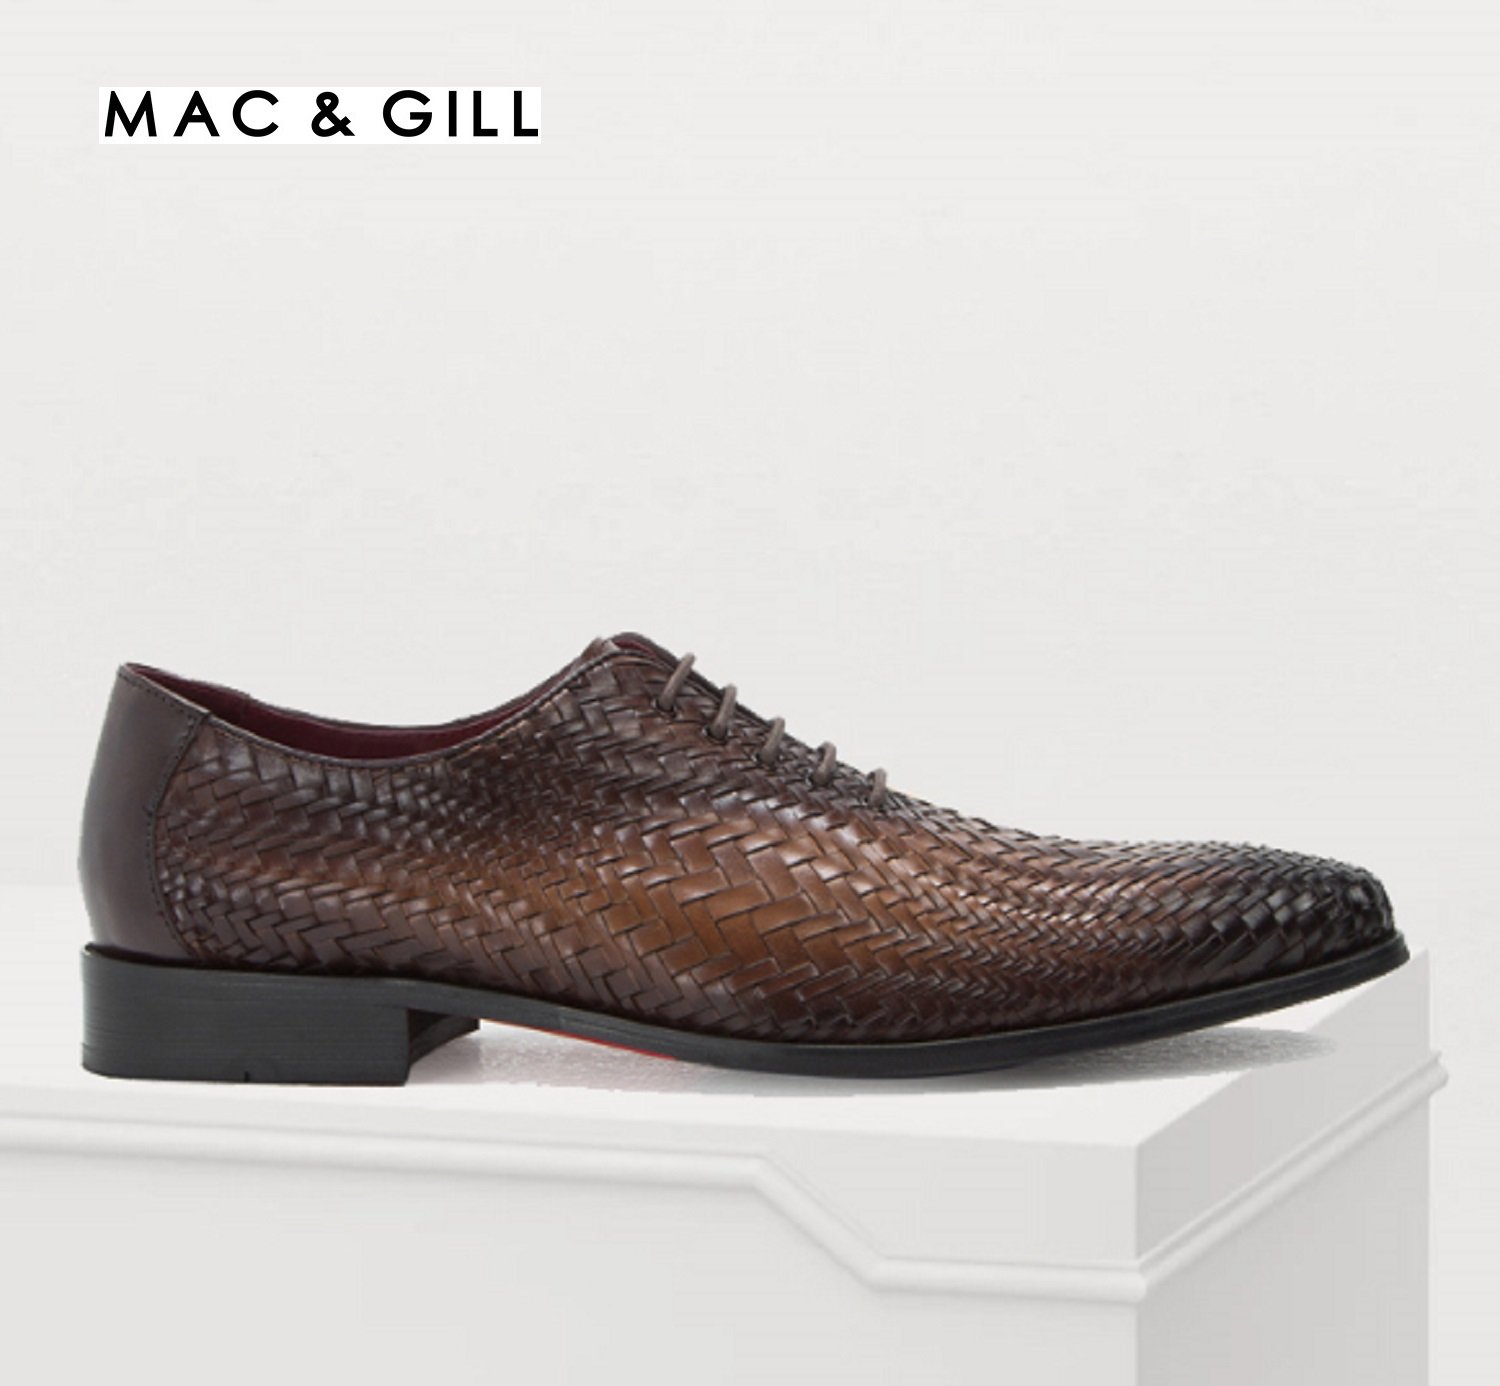 MAHLER WOVEN LEATHER LACE UP SHOES